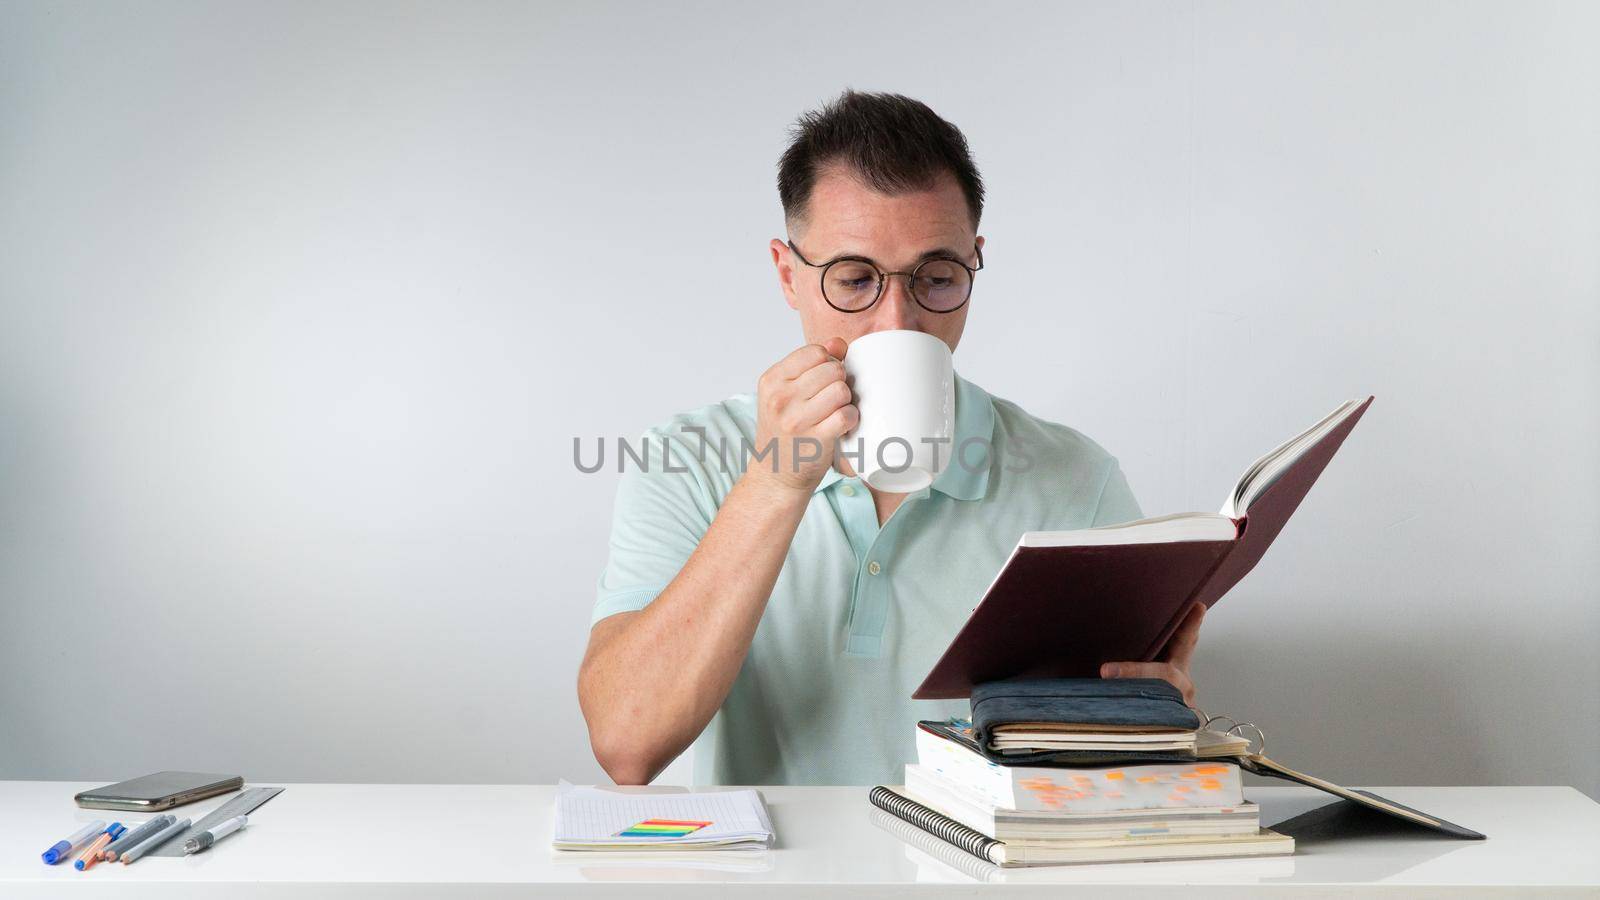 A student guy reading a book and drinking coffee at his desk - studying. High quality photo